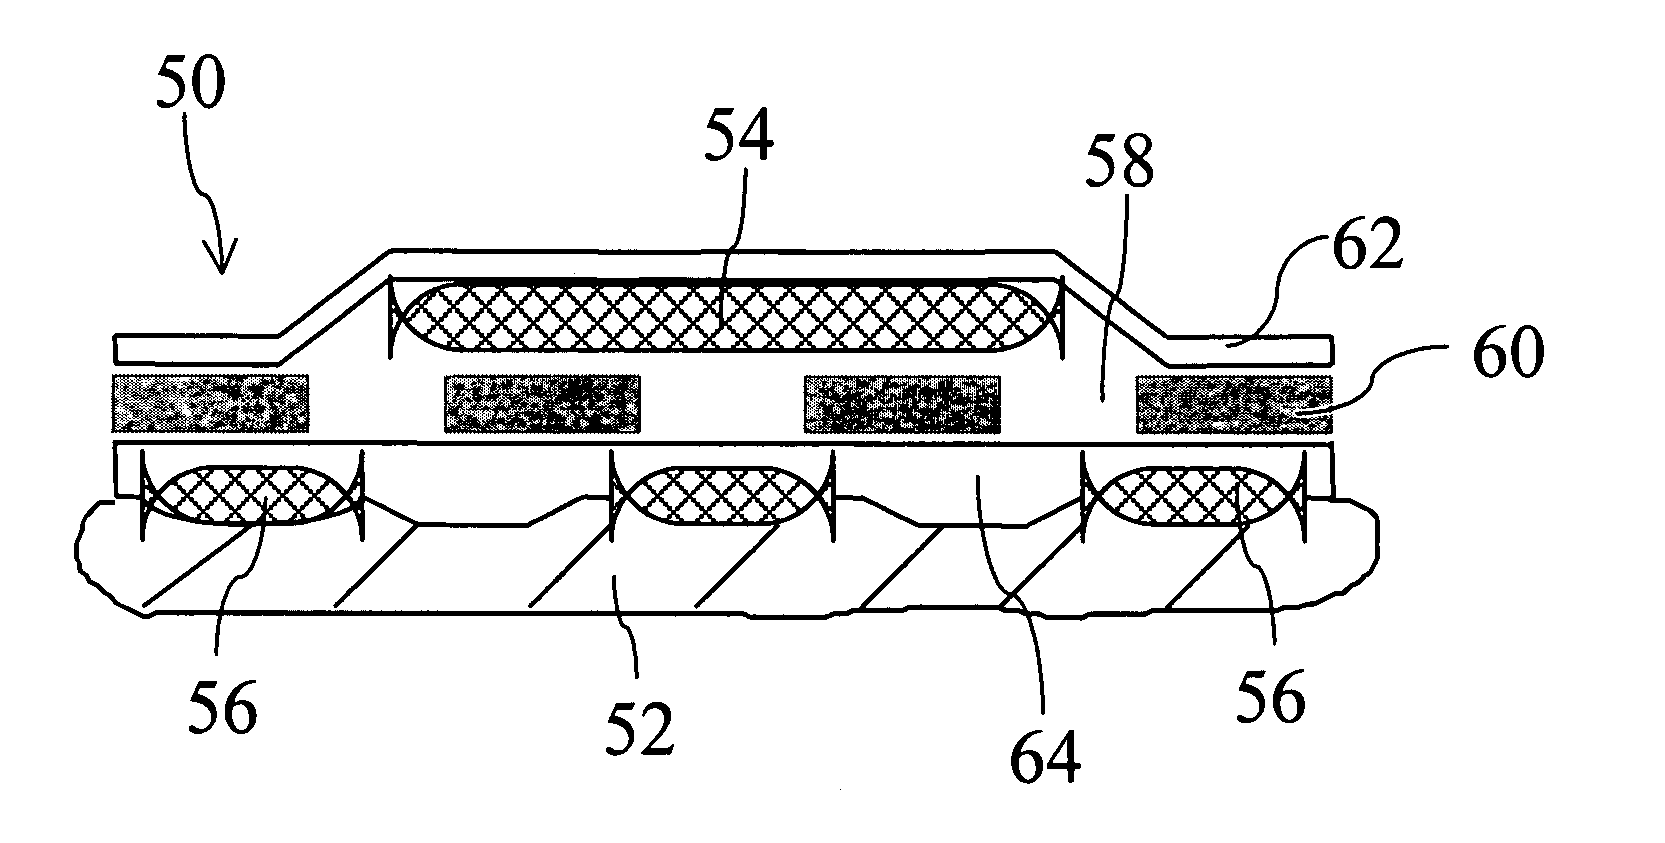 Electric energy auxiliary device of transdermal drug delivery patch